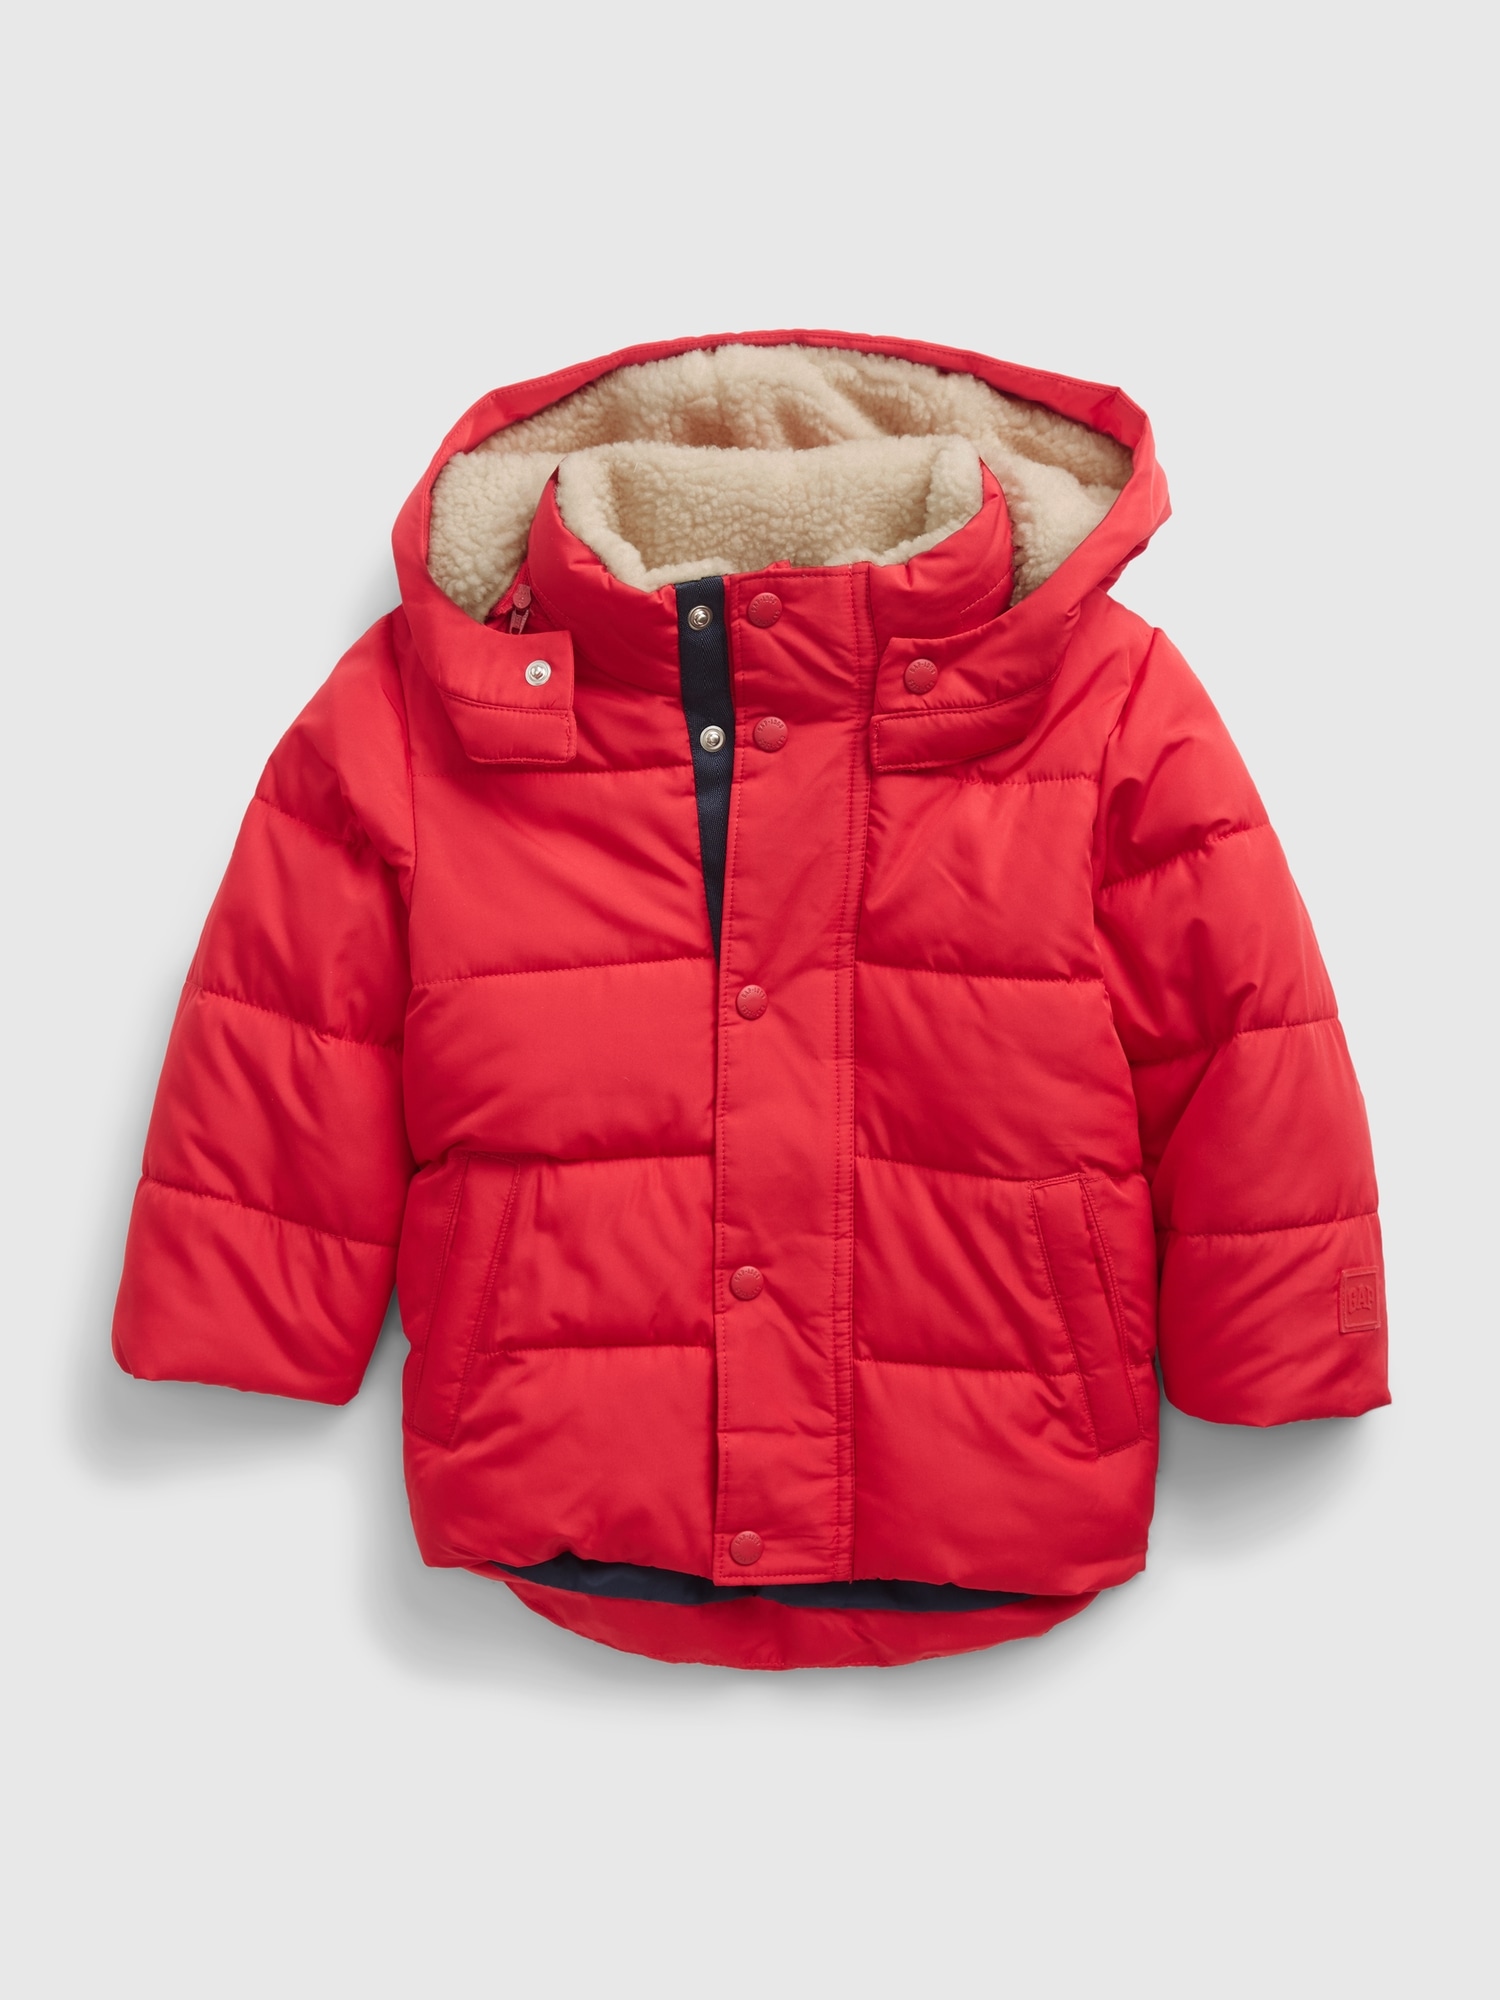 Toddler Recycled ColdControl Max Puffer Jacket | Gap